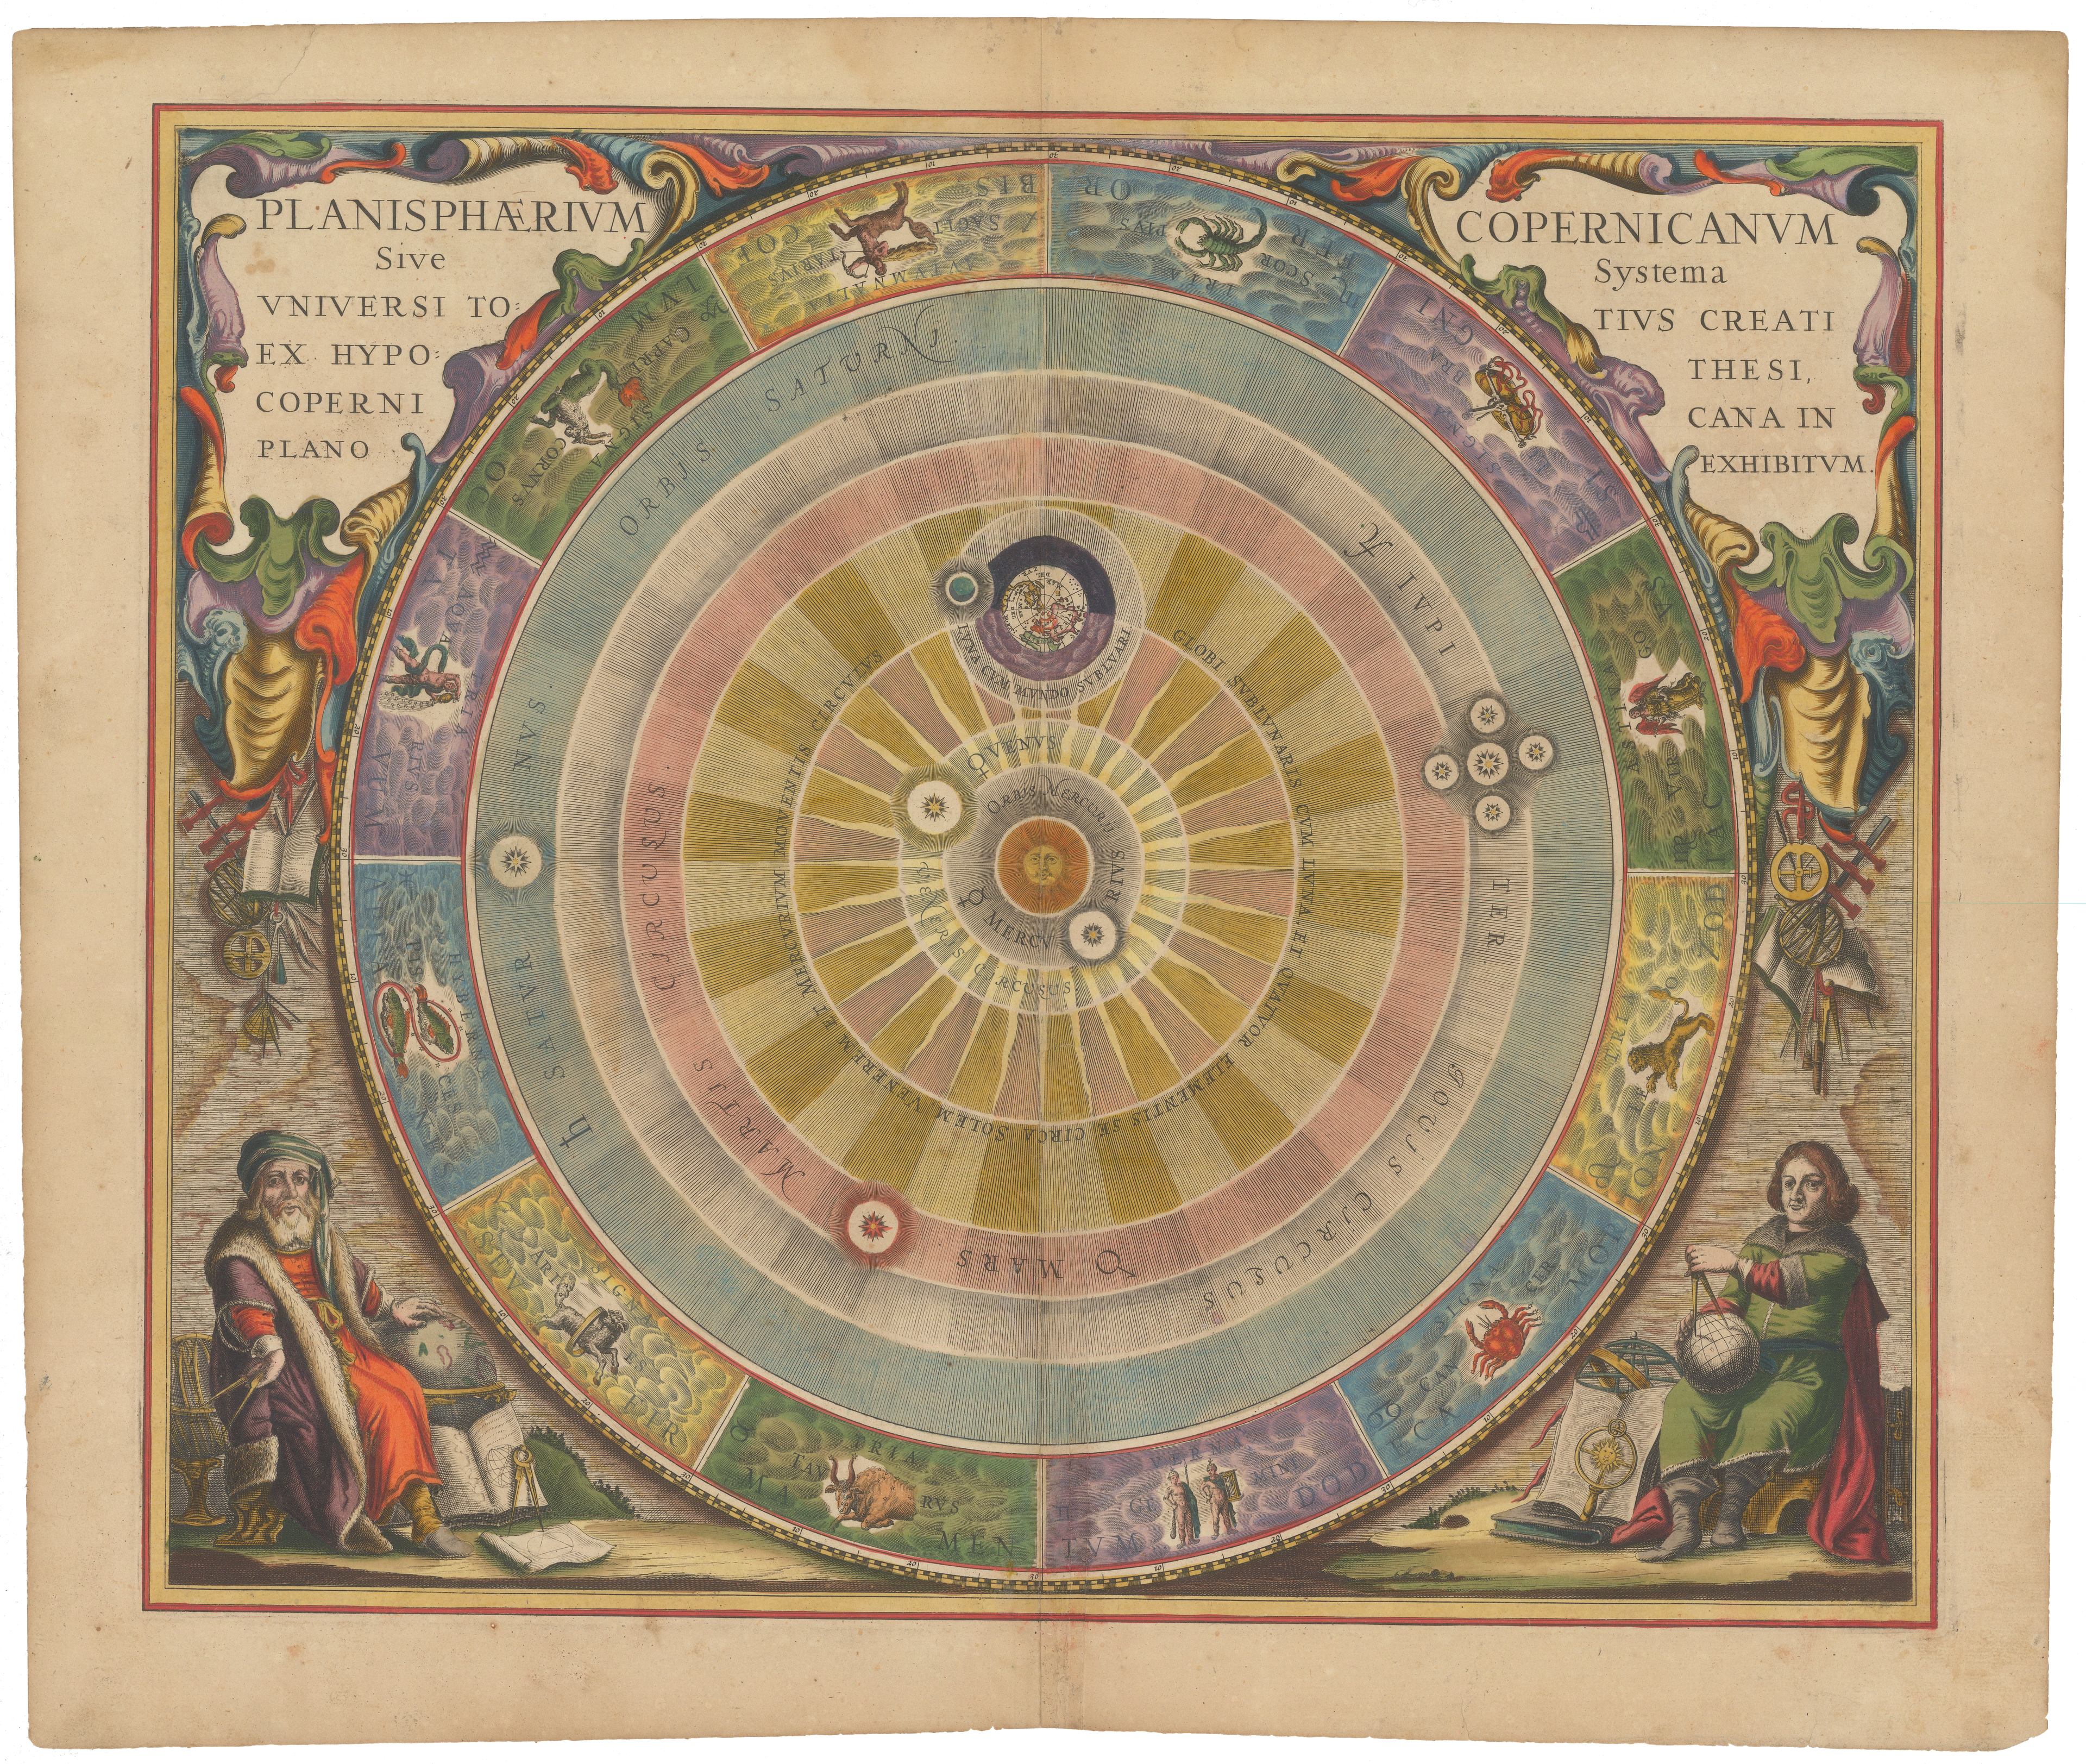 A hand coloured diagram of the universe showing the heavens and the sun according to the Copernican system.